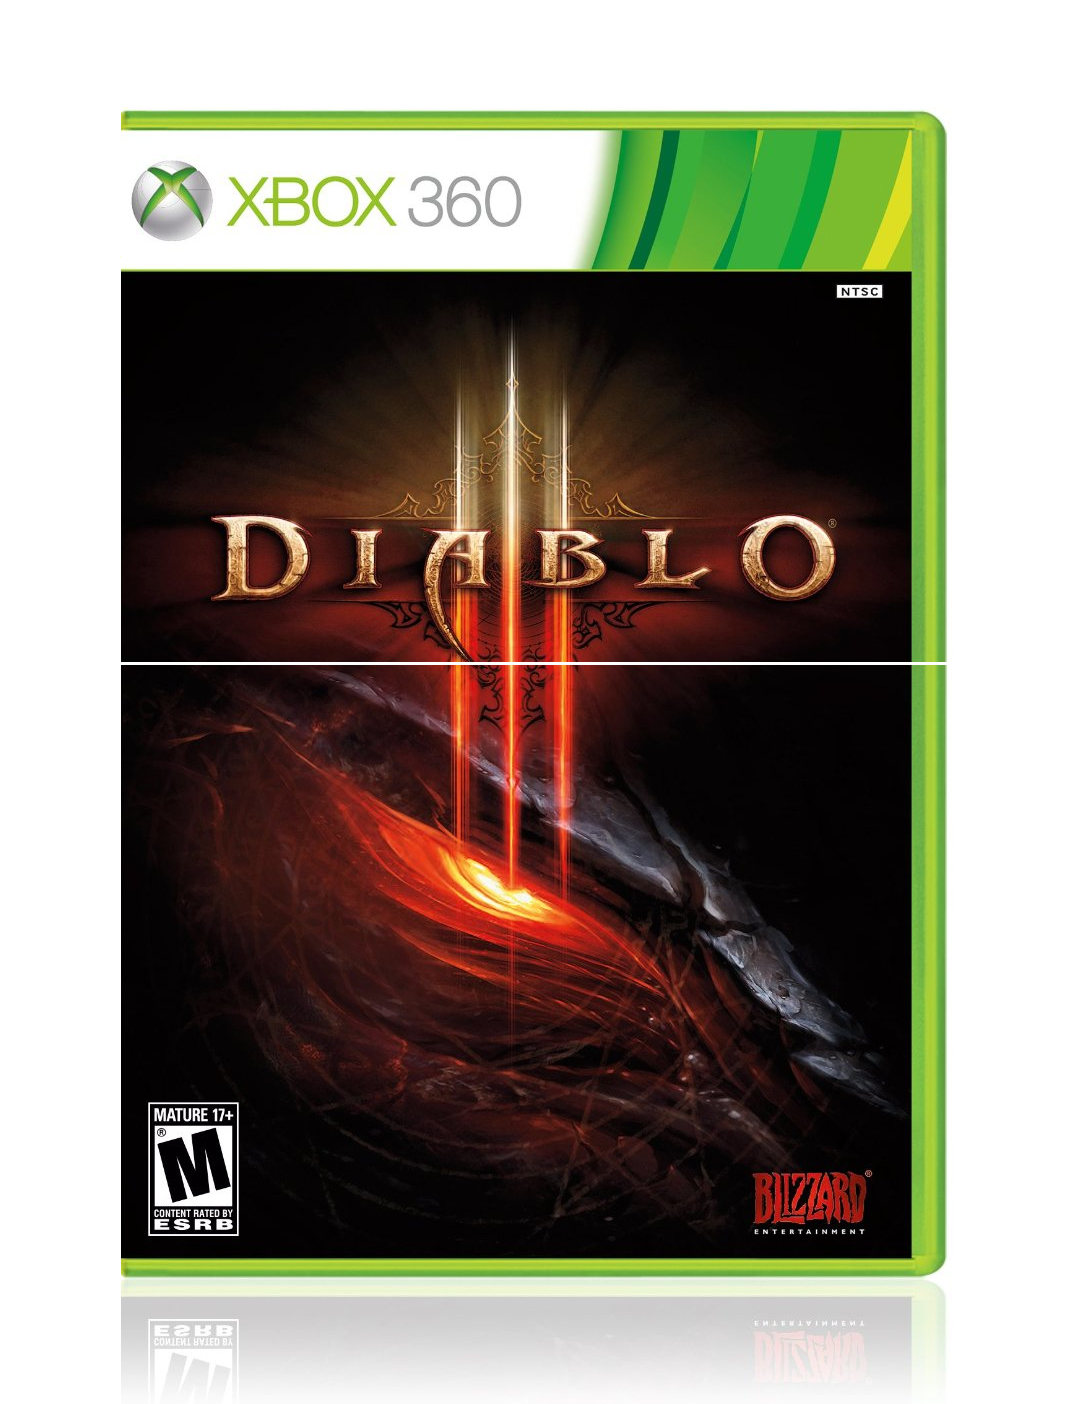 Diablo III PS3 Ships Sept 3 and coming to XBox 360